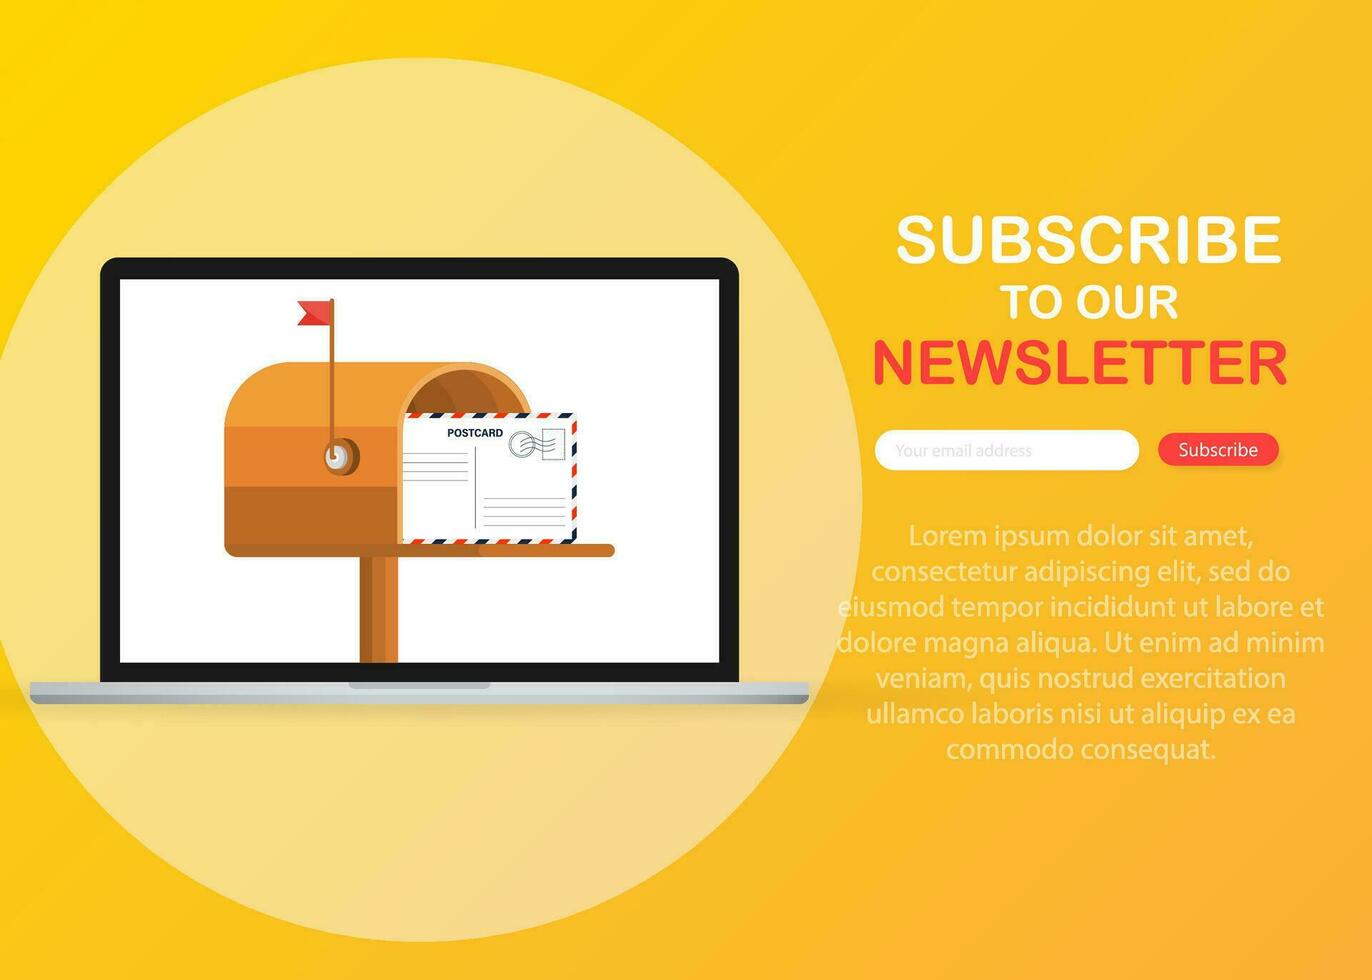 Subscribe Now For Our Newsletter. Subscribe Button Template. vector